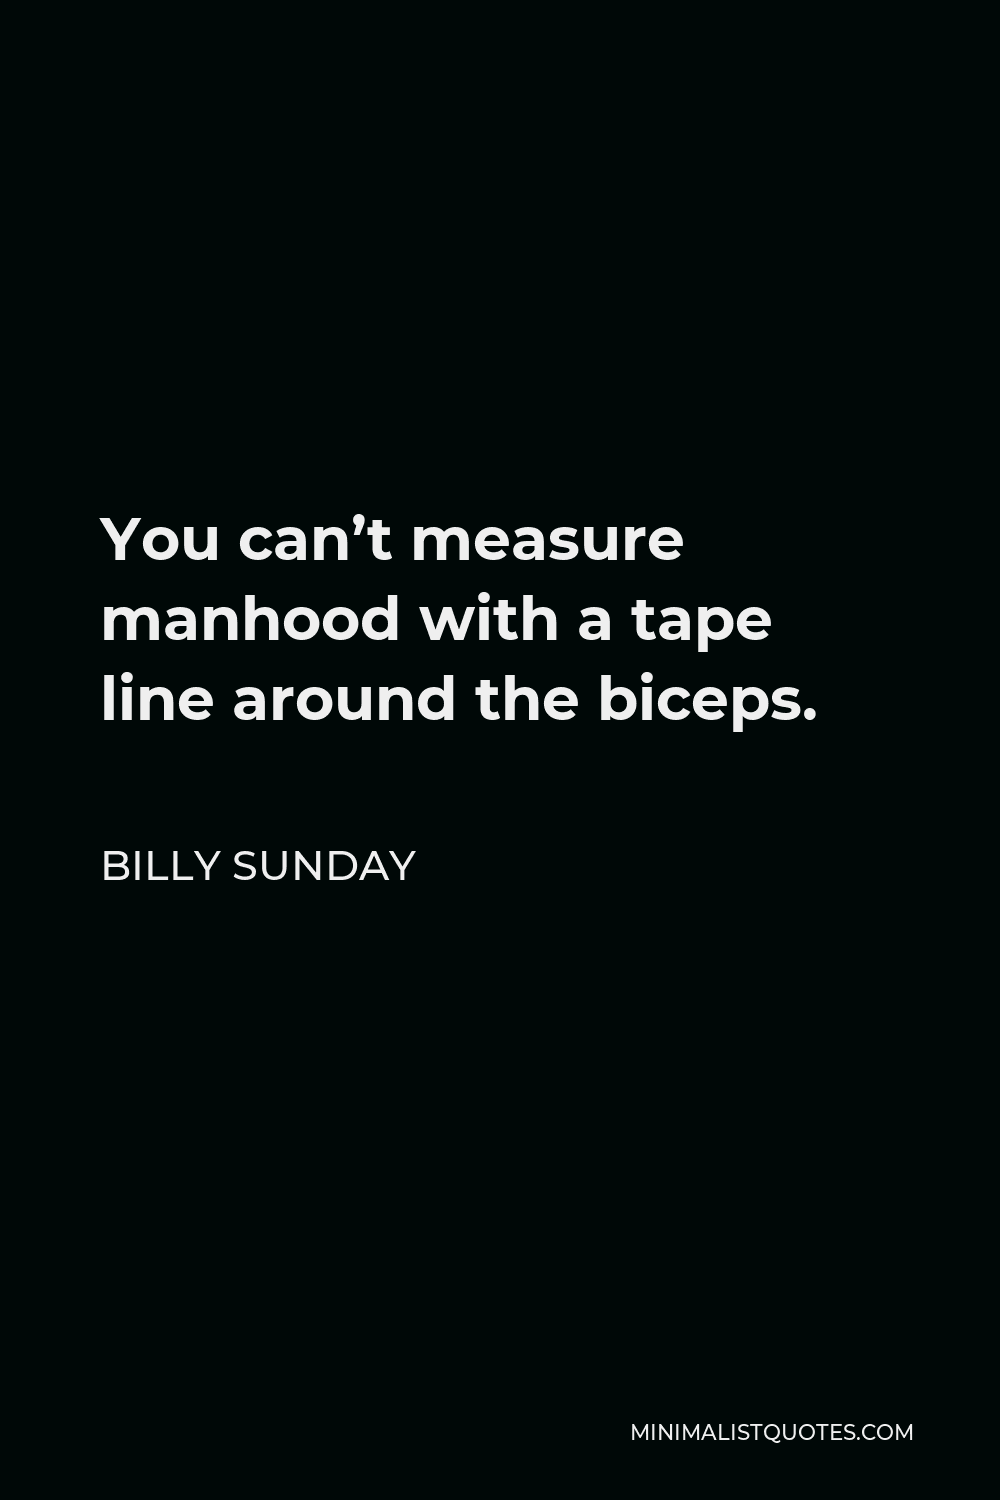 Billy Sunday Quote - You can’t measure manhood with a tape line around the biceps.